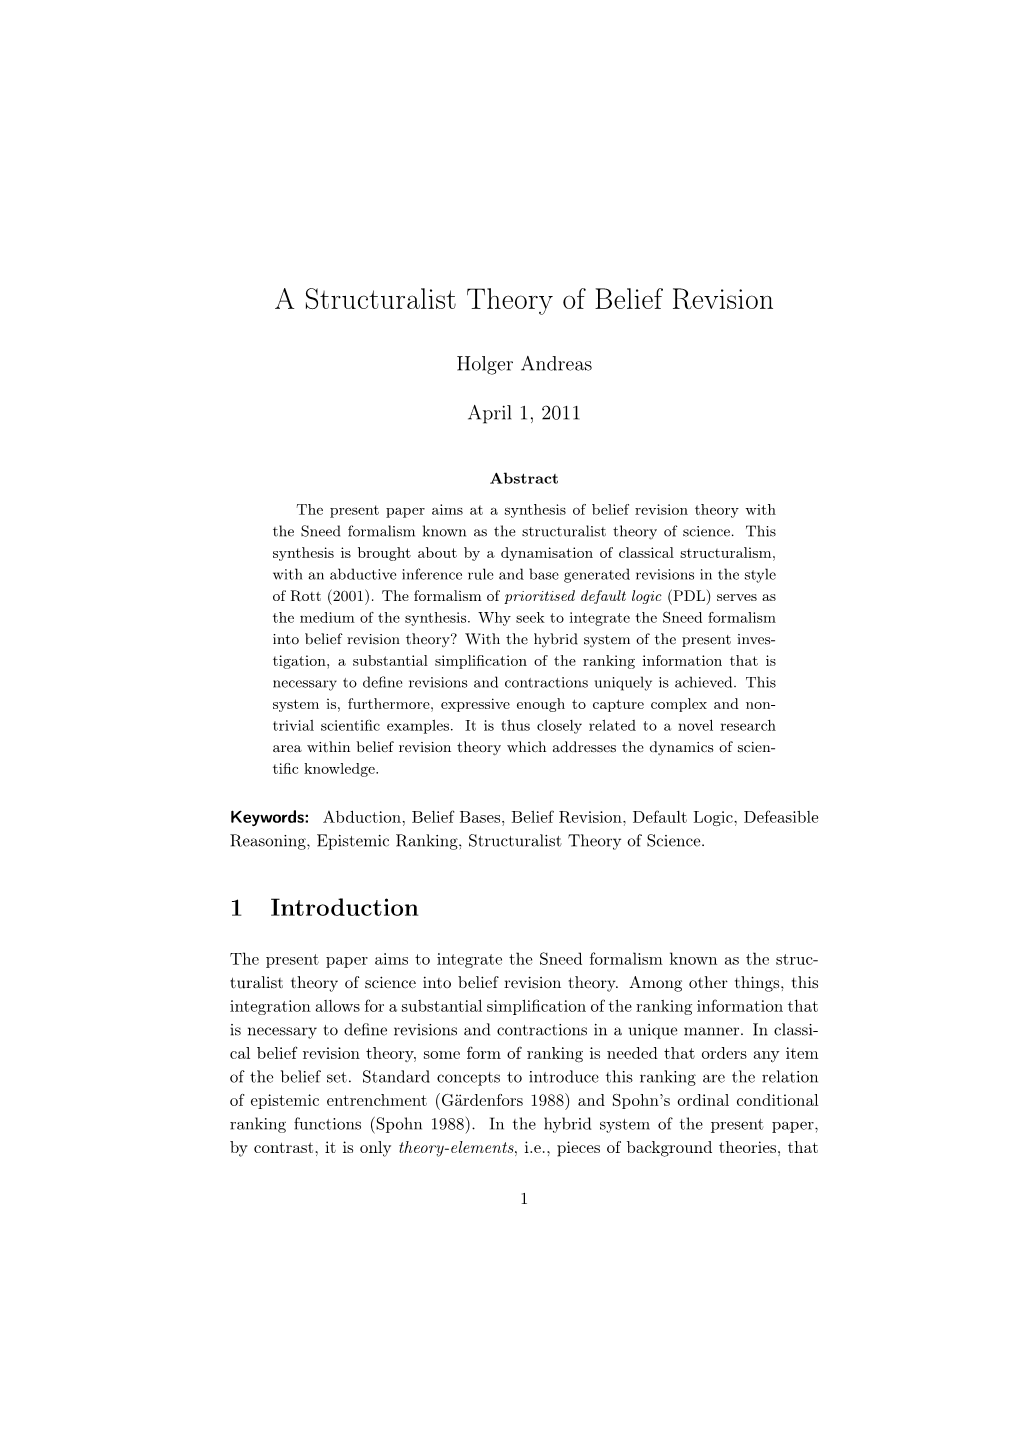 A Structuralist Theory of Belief Revision